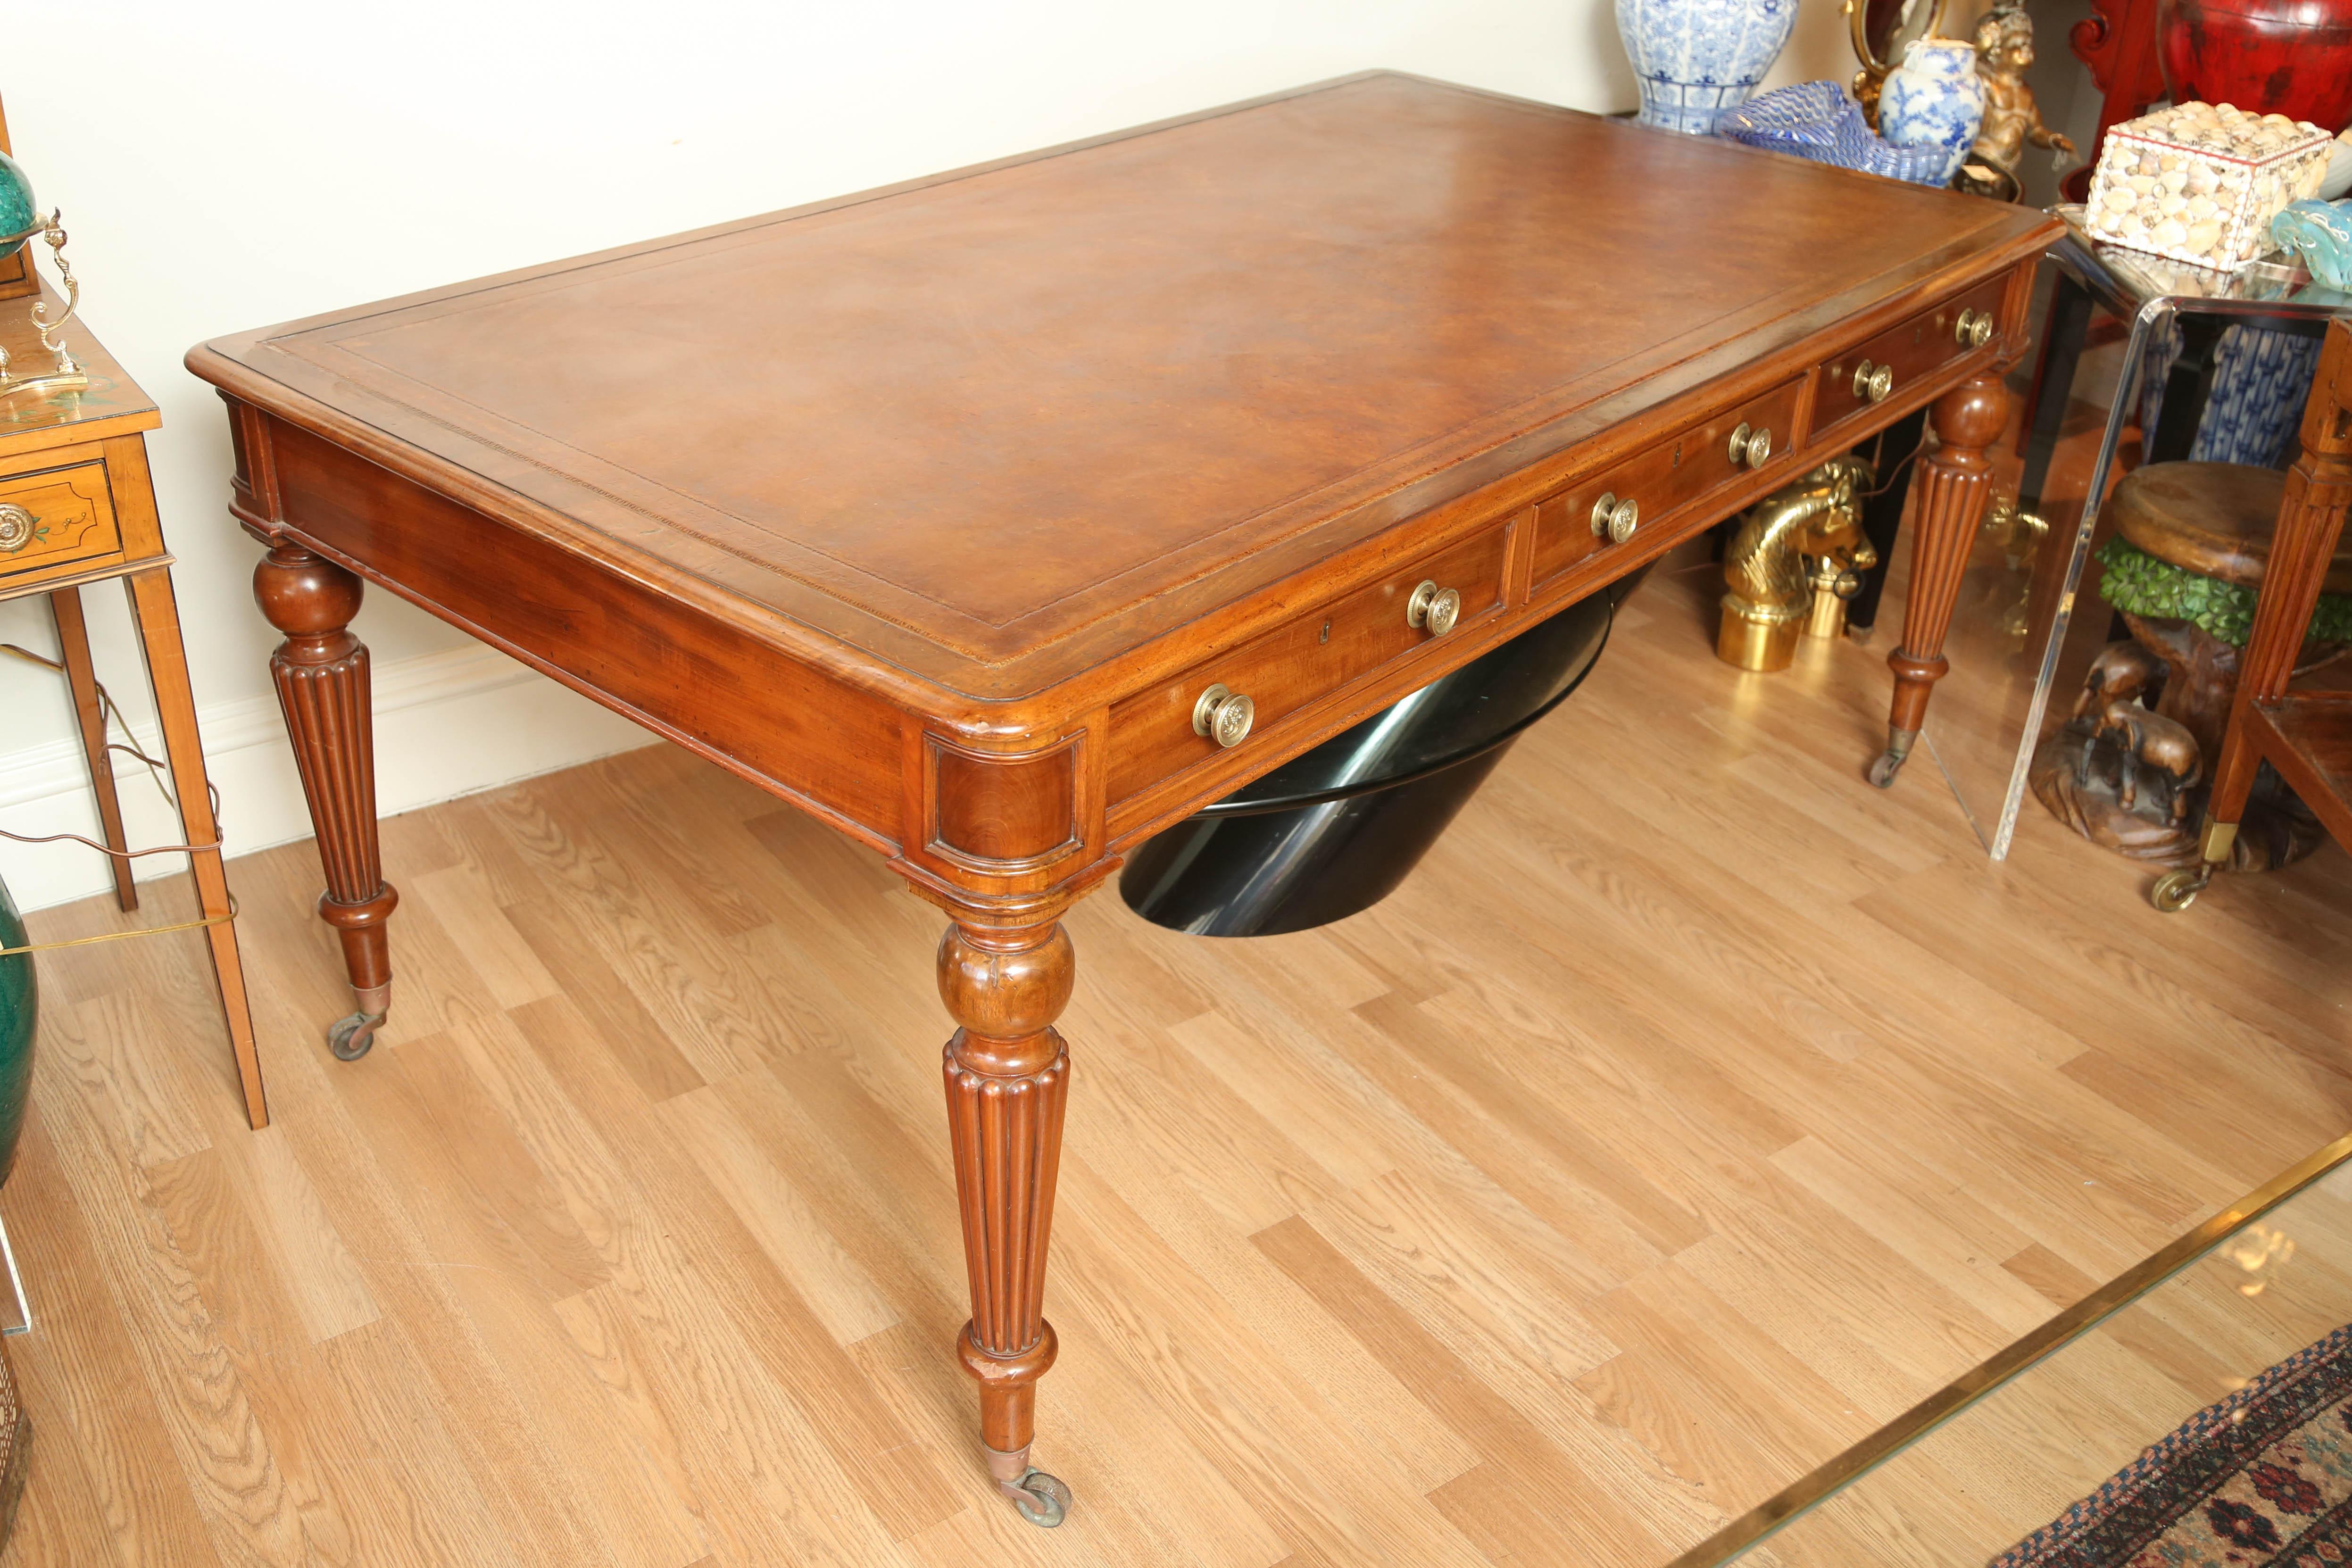 Grand English Regency period mahogany partners desk with three drawers on each side. Original brass hardware and handsome leather work surface. Detailed tapered legs with brass castors.